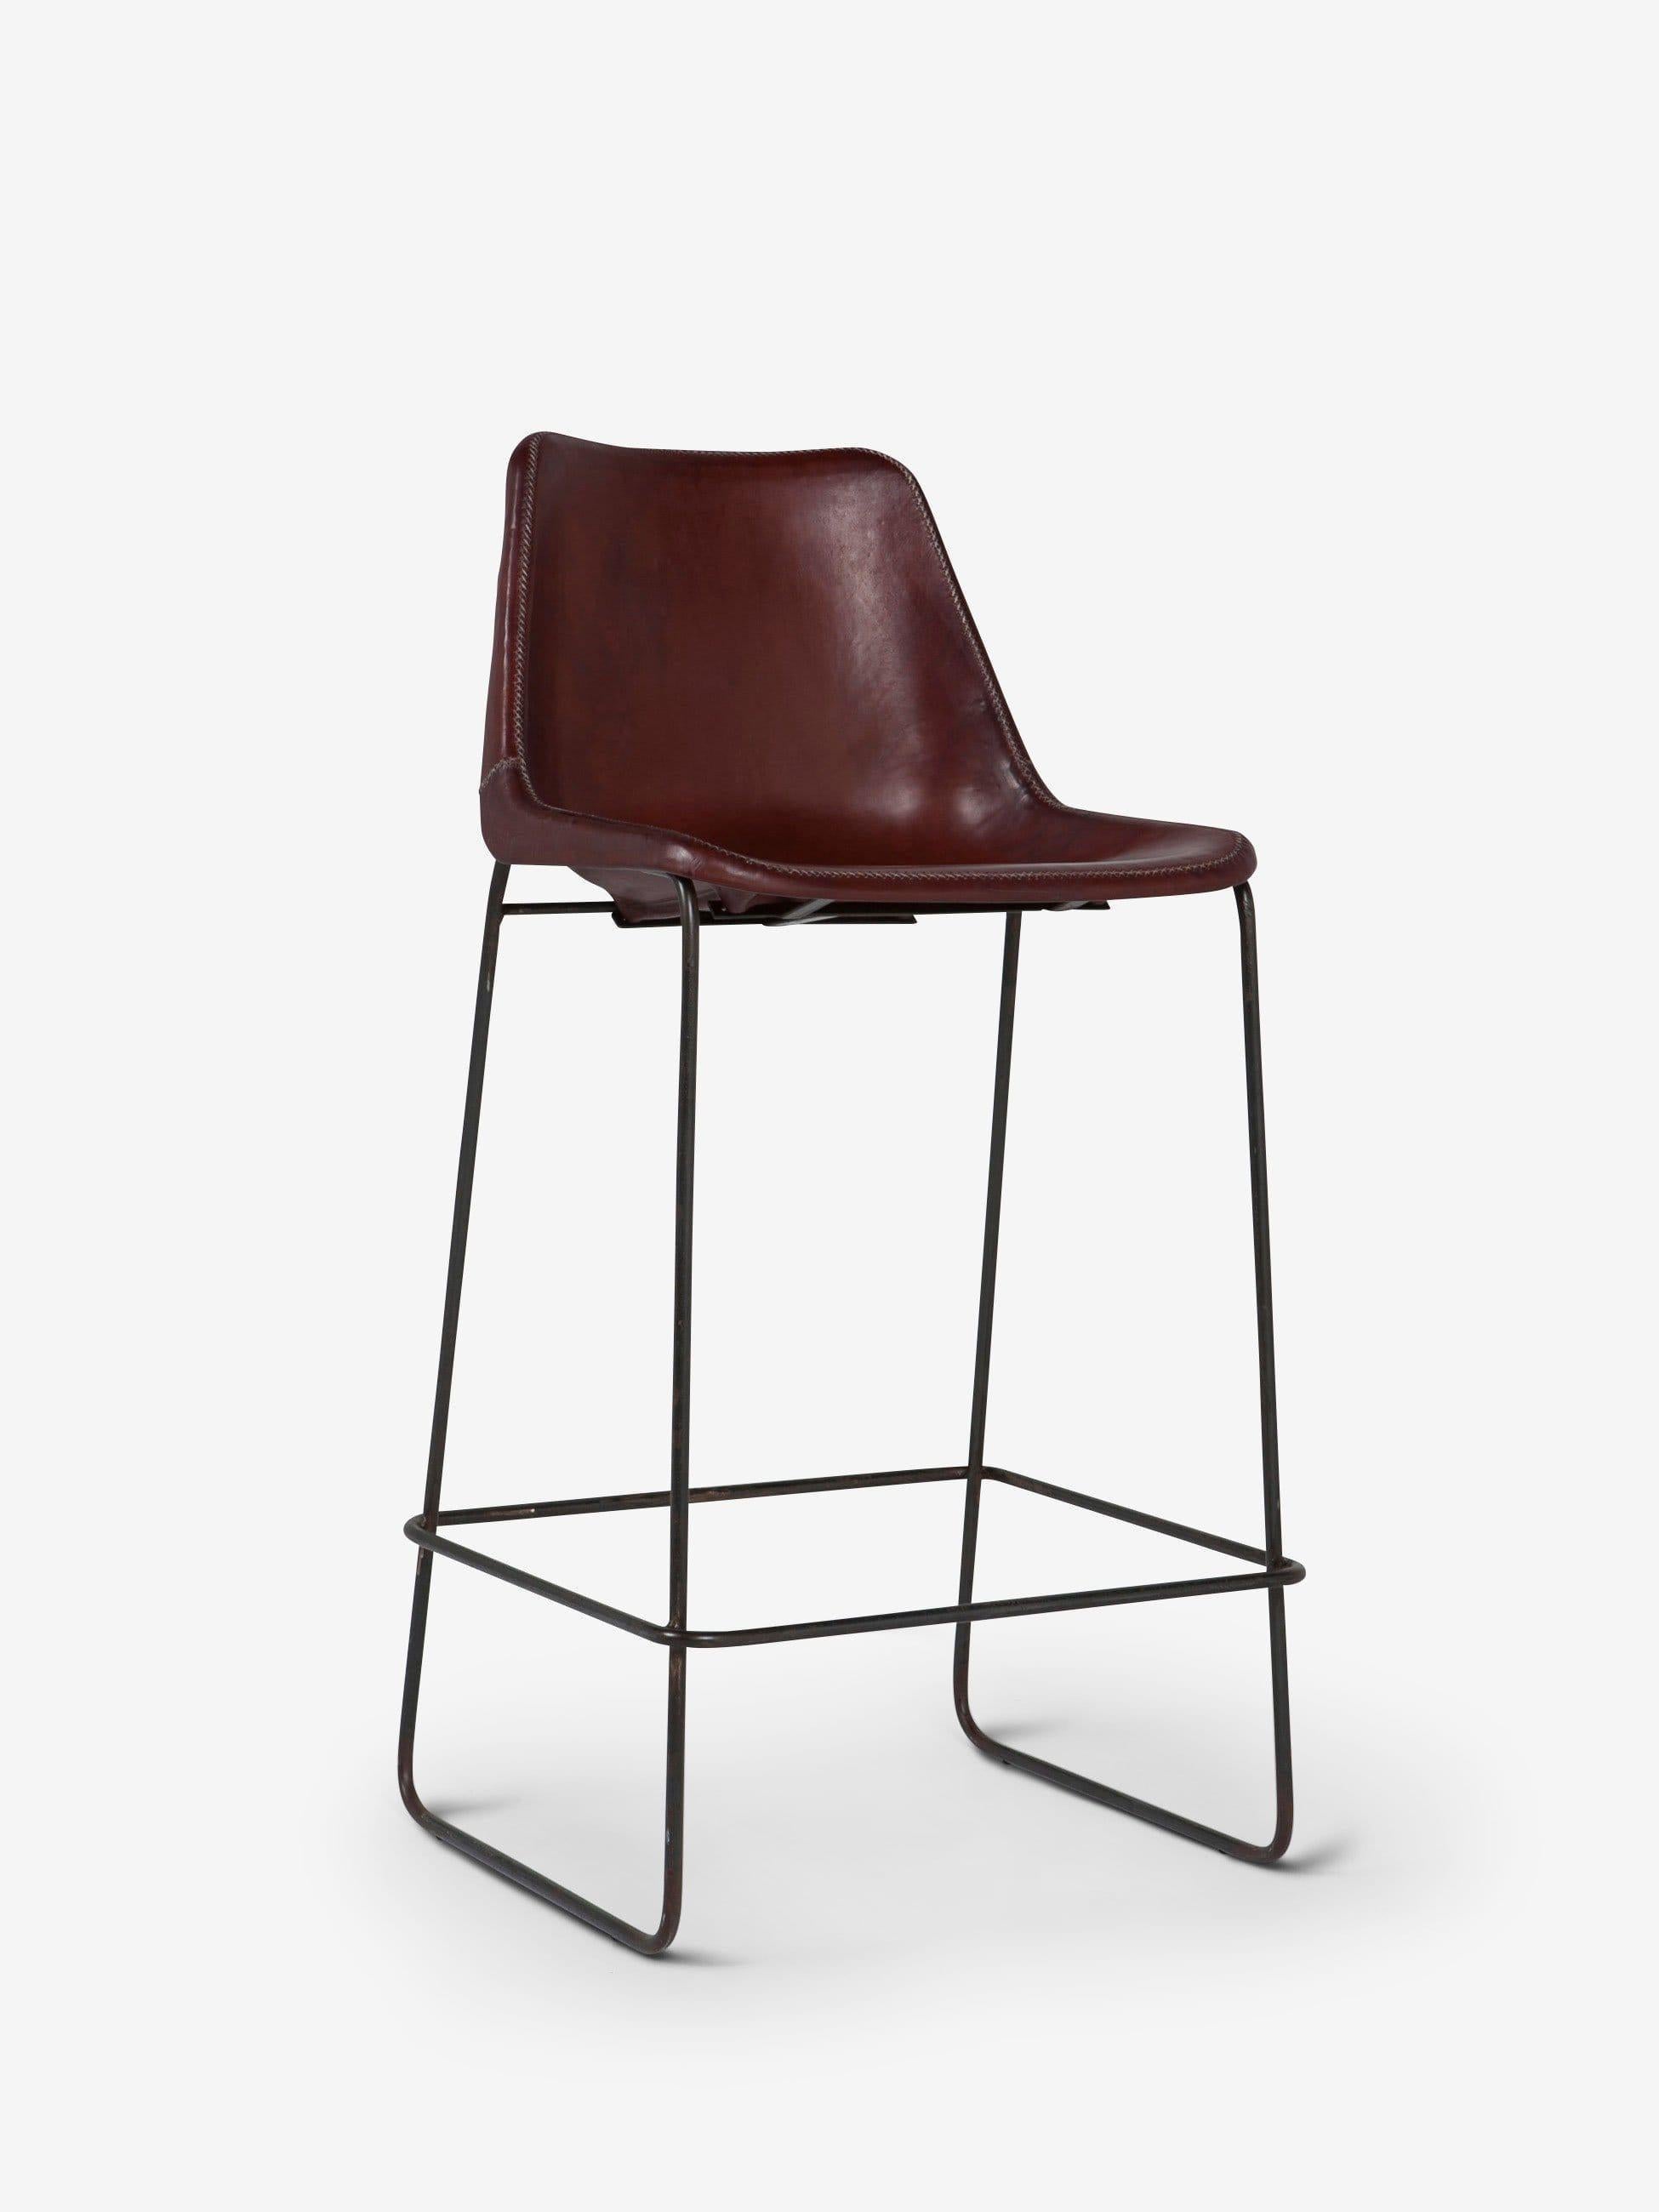 Contemporary High Leather Giron Bar Stool by Sol Y Luna For Sale